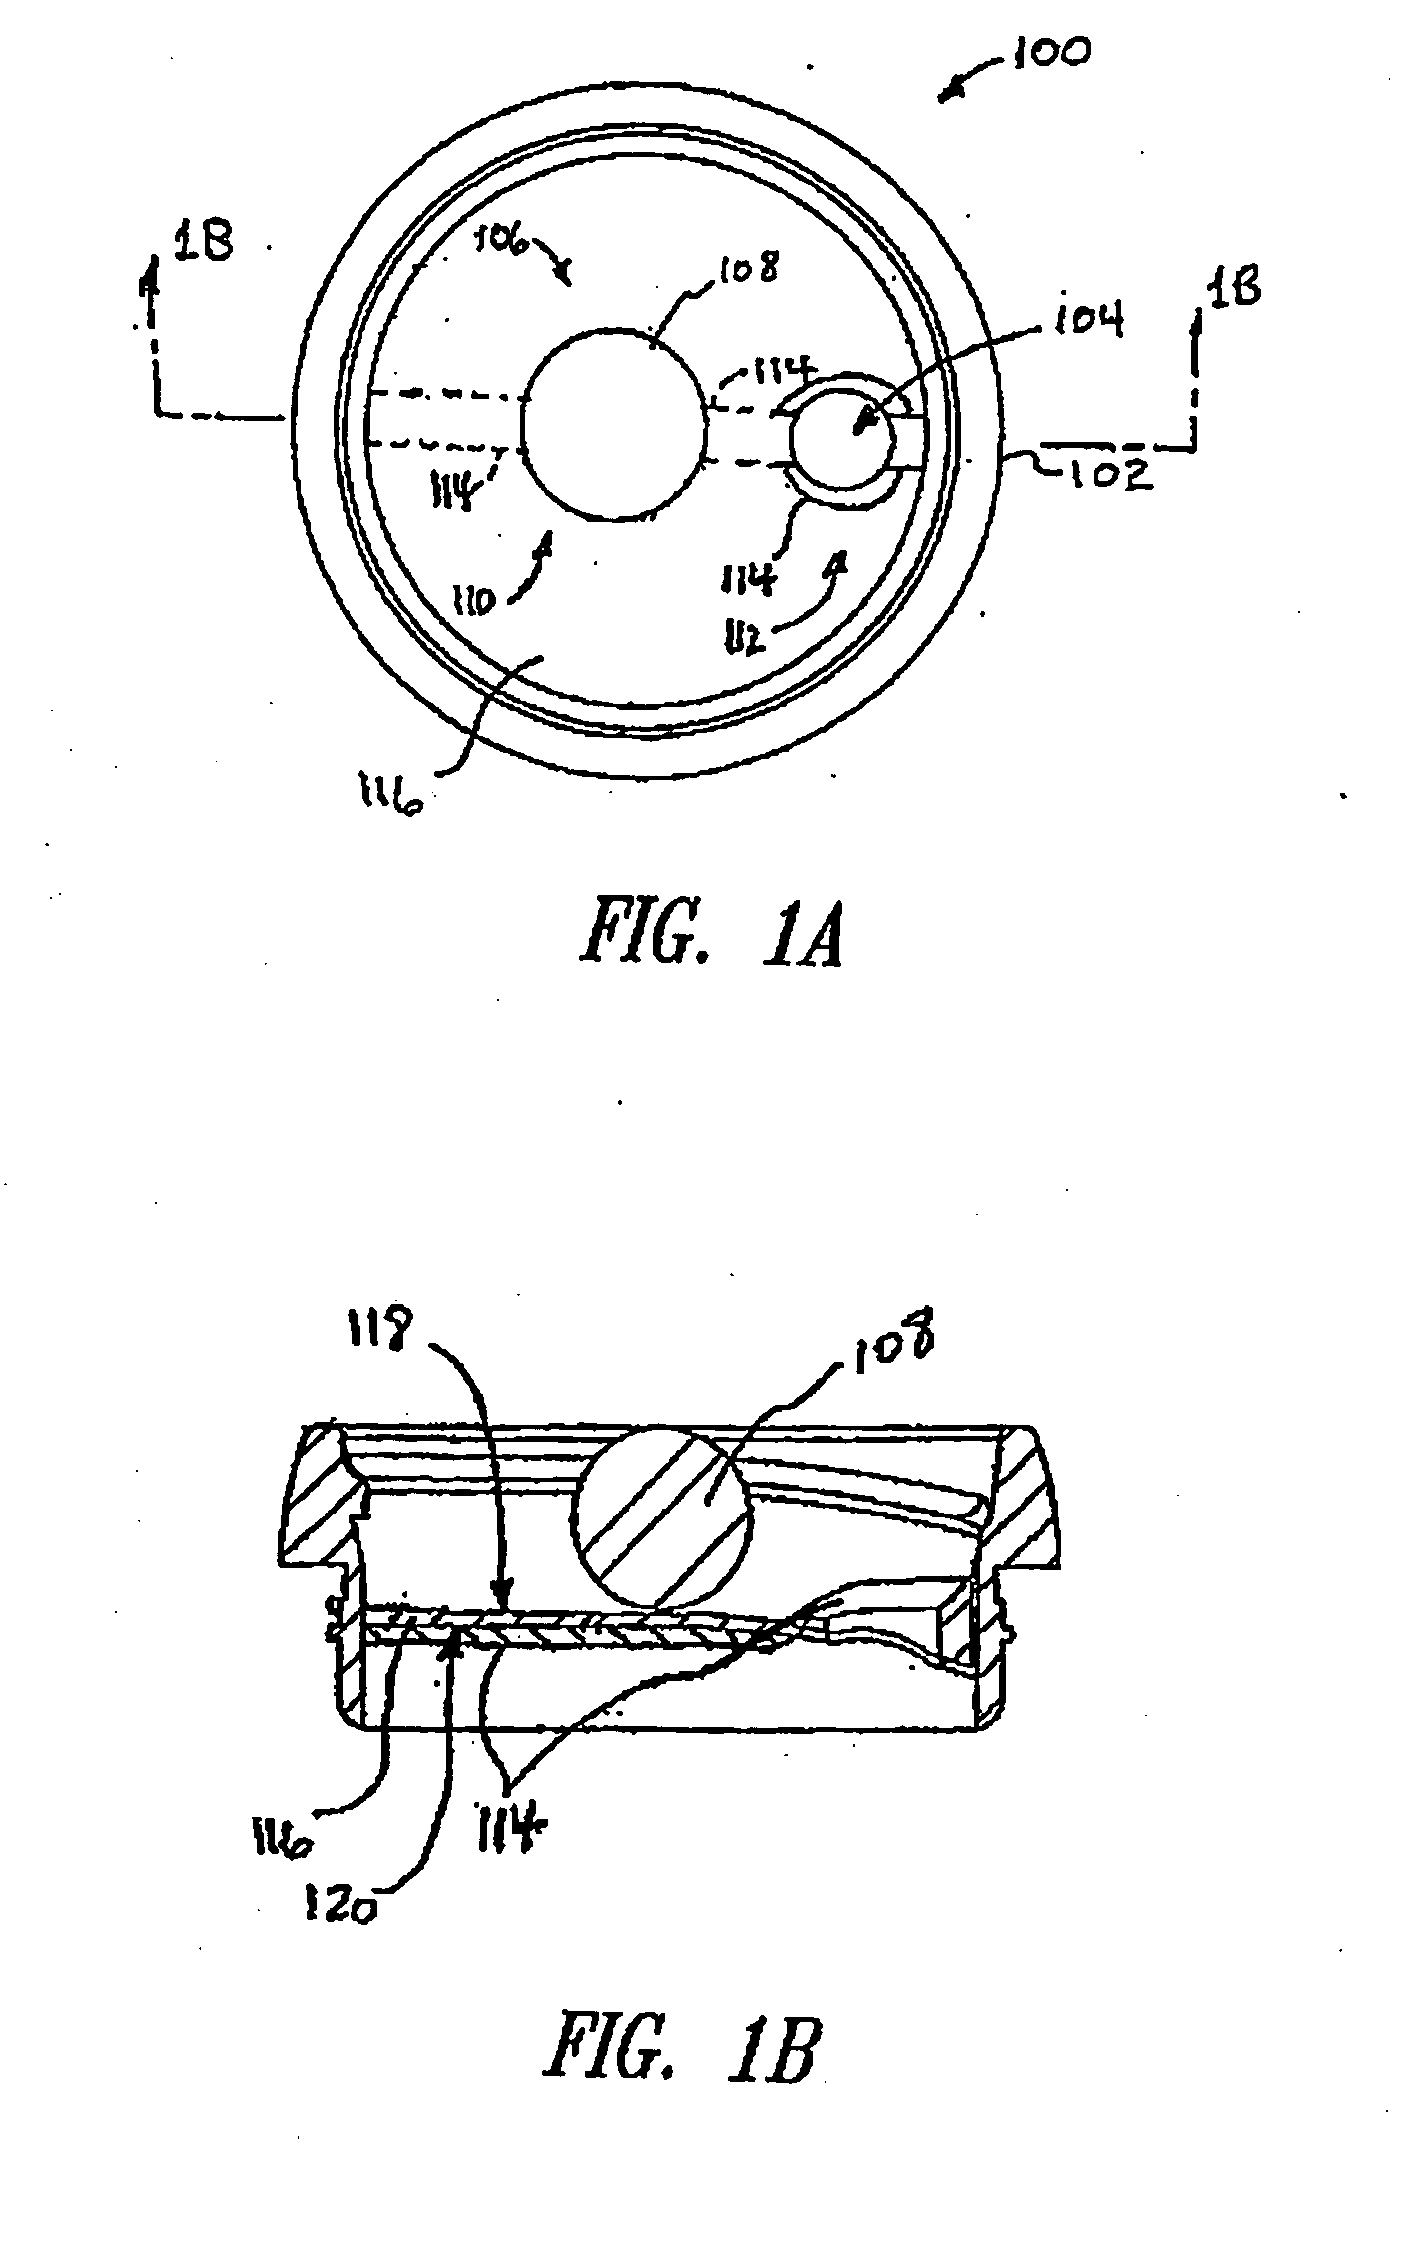 Apparatus and method for magnetically sealing a beverage container lid